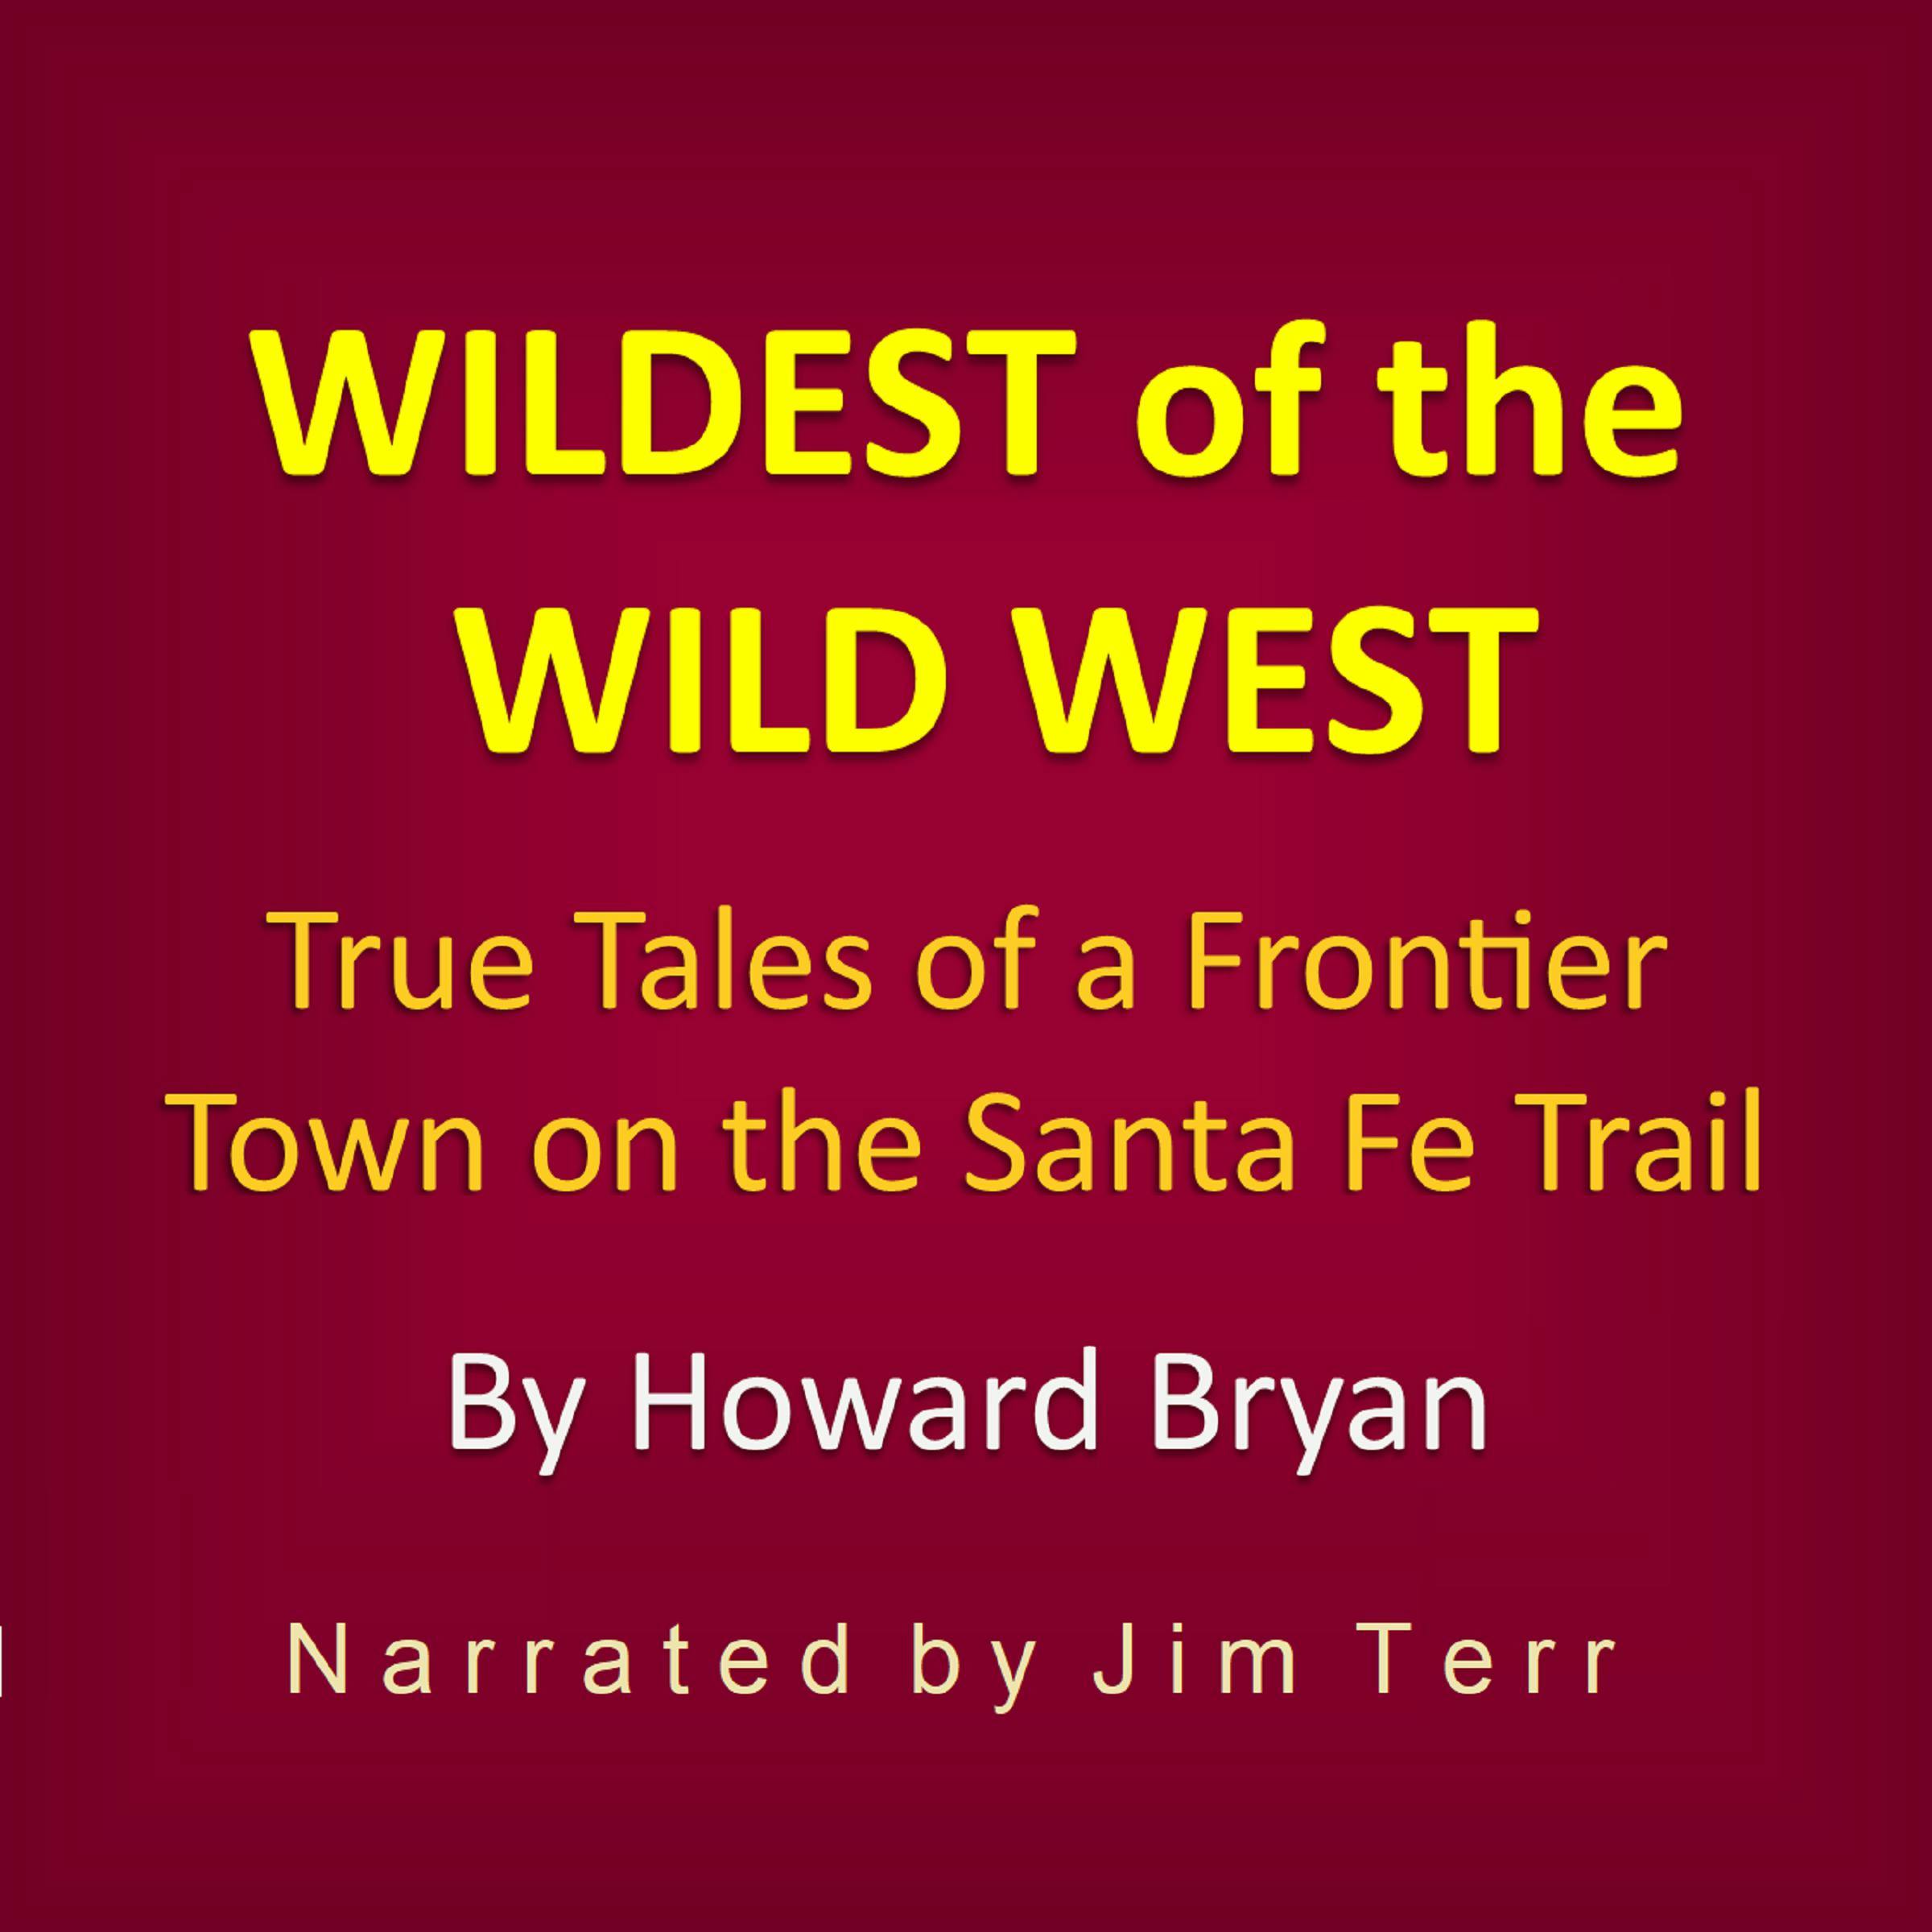 Wildest of the Wild West: True Tales of a Frontier Town on the Santa Fe Trail, forward by Max Evans - Howard Bryan